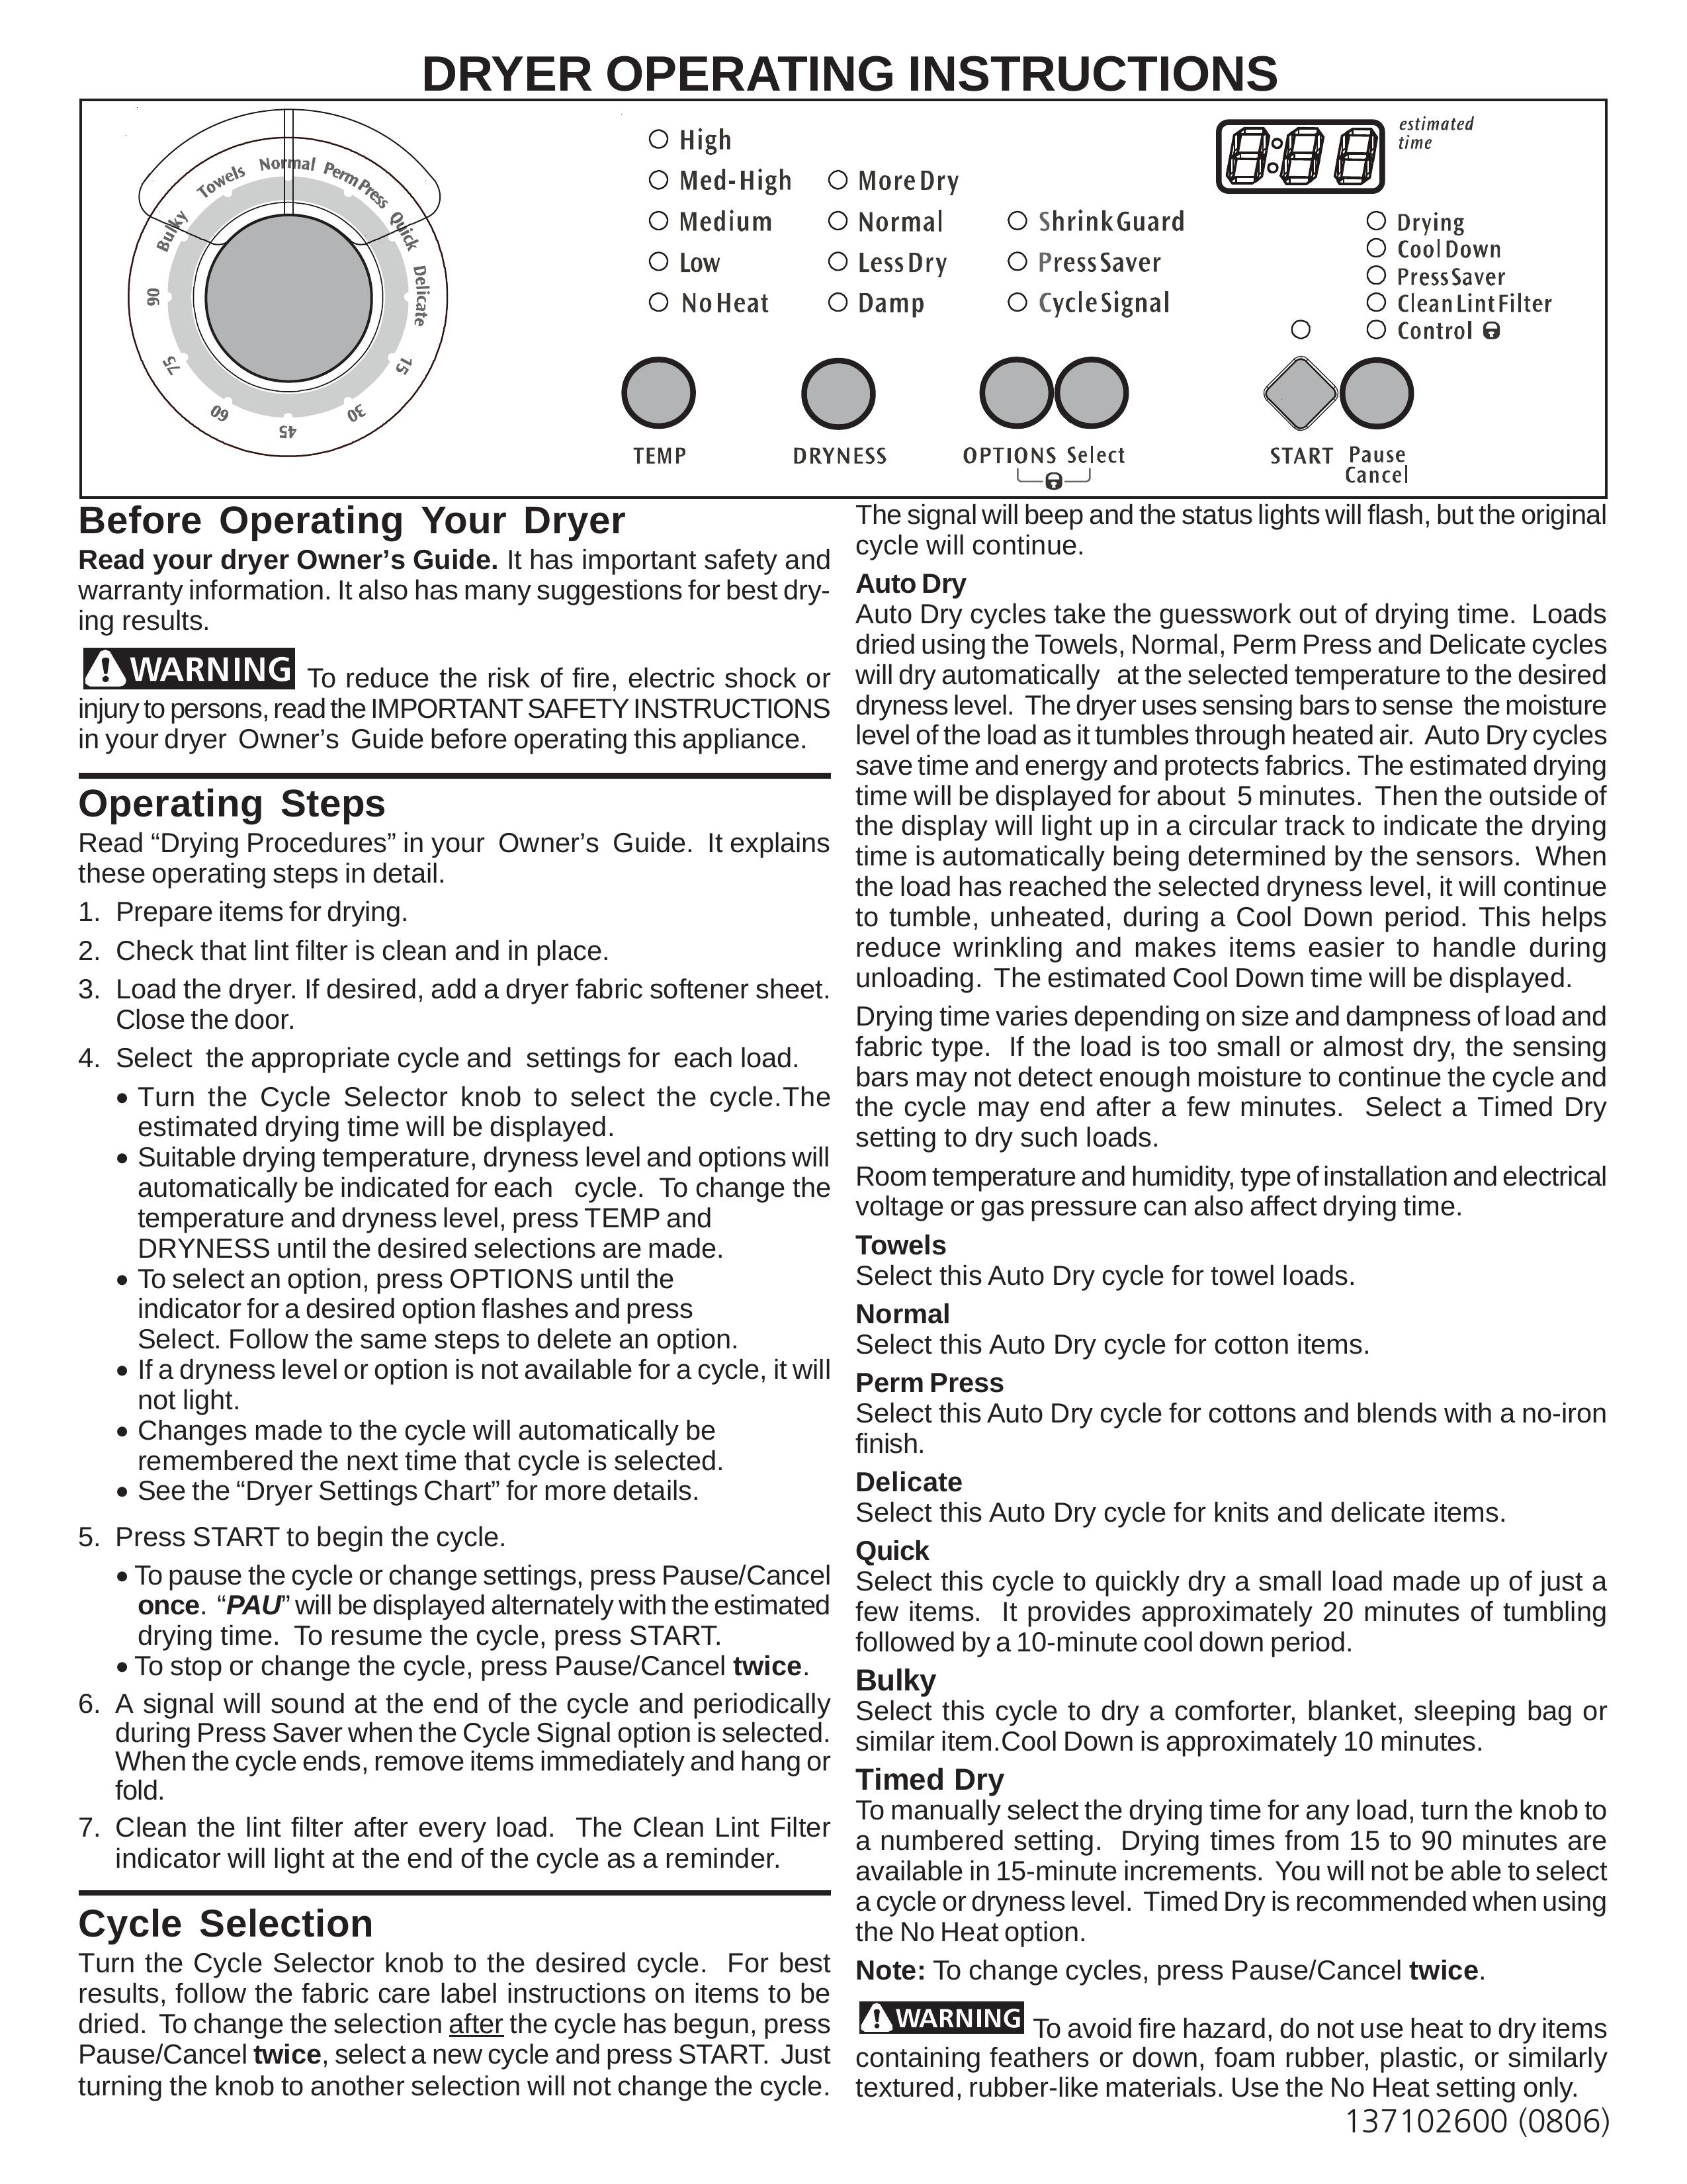 Frigidaire 137102600 Clothes Dryer User Manual